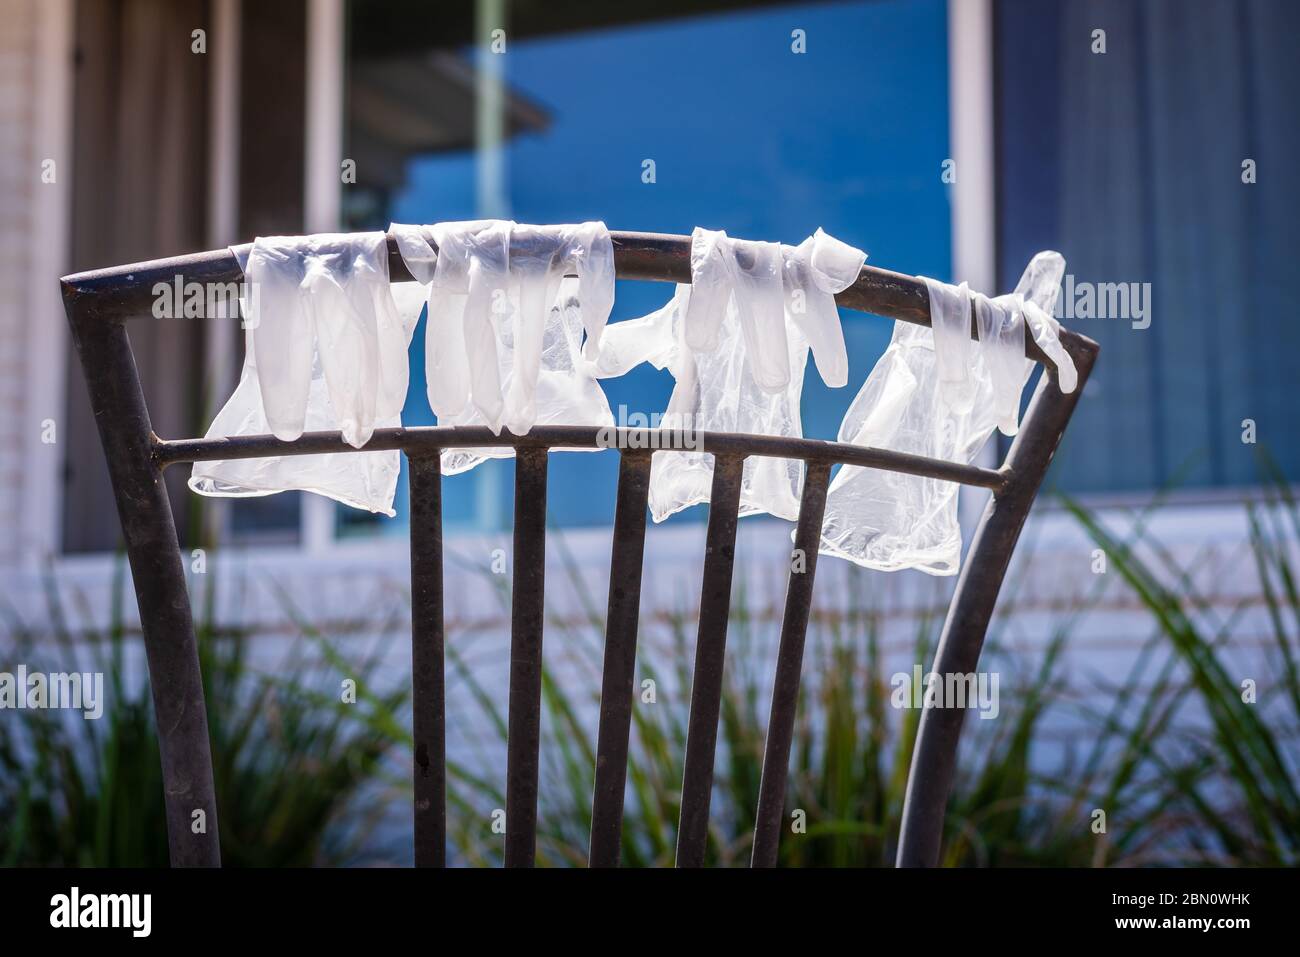 Washed Disposable Plastic Gloves Hanging on Back of Chair to Dry during the Covid-19 pandemic. Stock Photo